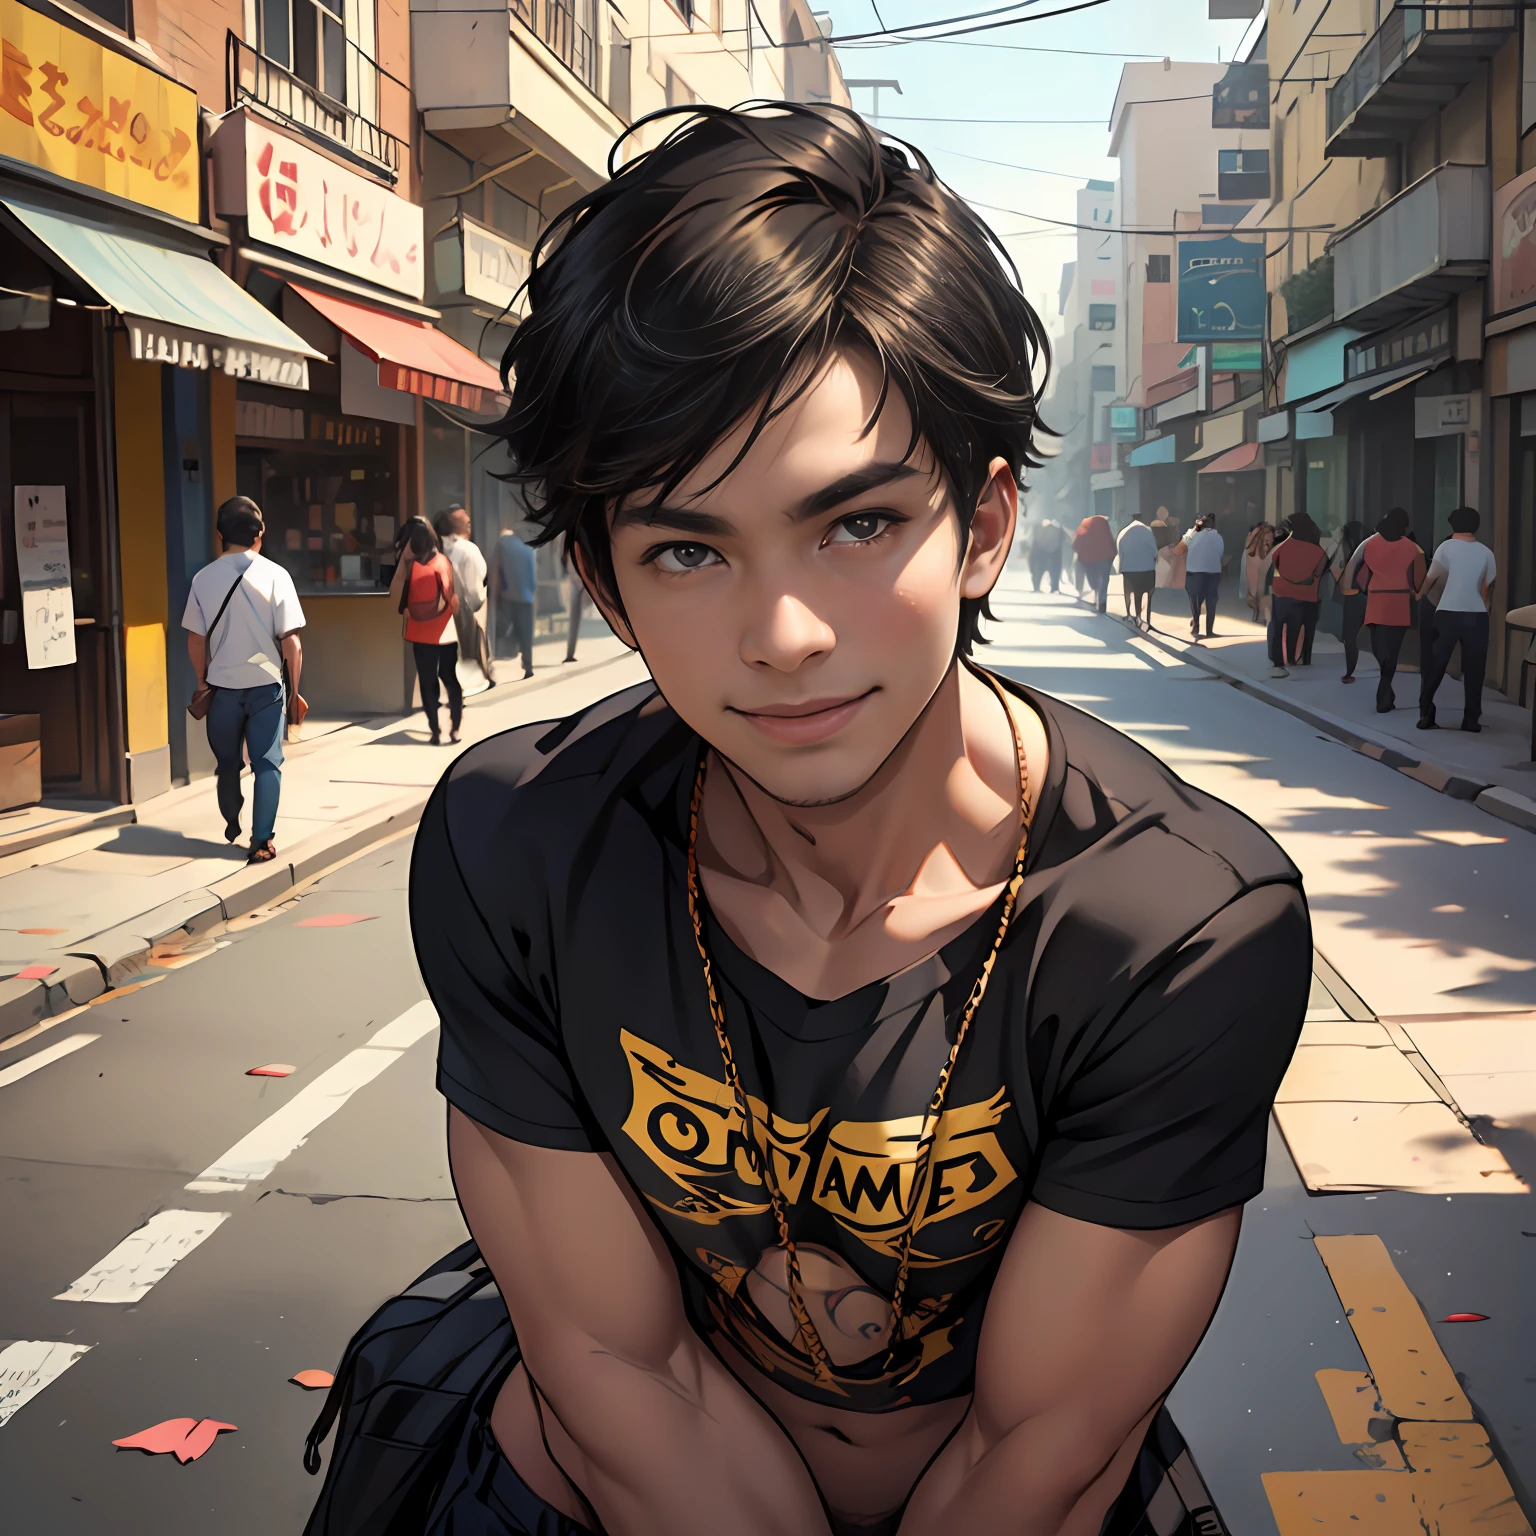 black t-shirt with gold ultra-realistic tight-fitting t-shirt, 16-year-old boy with brown cinnamon skin, toned athletic body straight hair,male serious thoughtful observer has a naked back black tight-fitting t-shirt walking, Smiling through the streets of a modern city, a Cernaco friend approaches him from behind and hugs him.